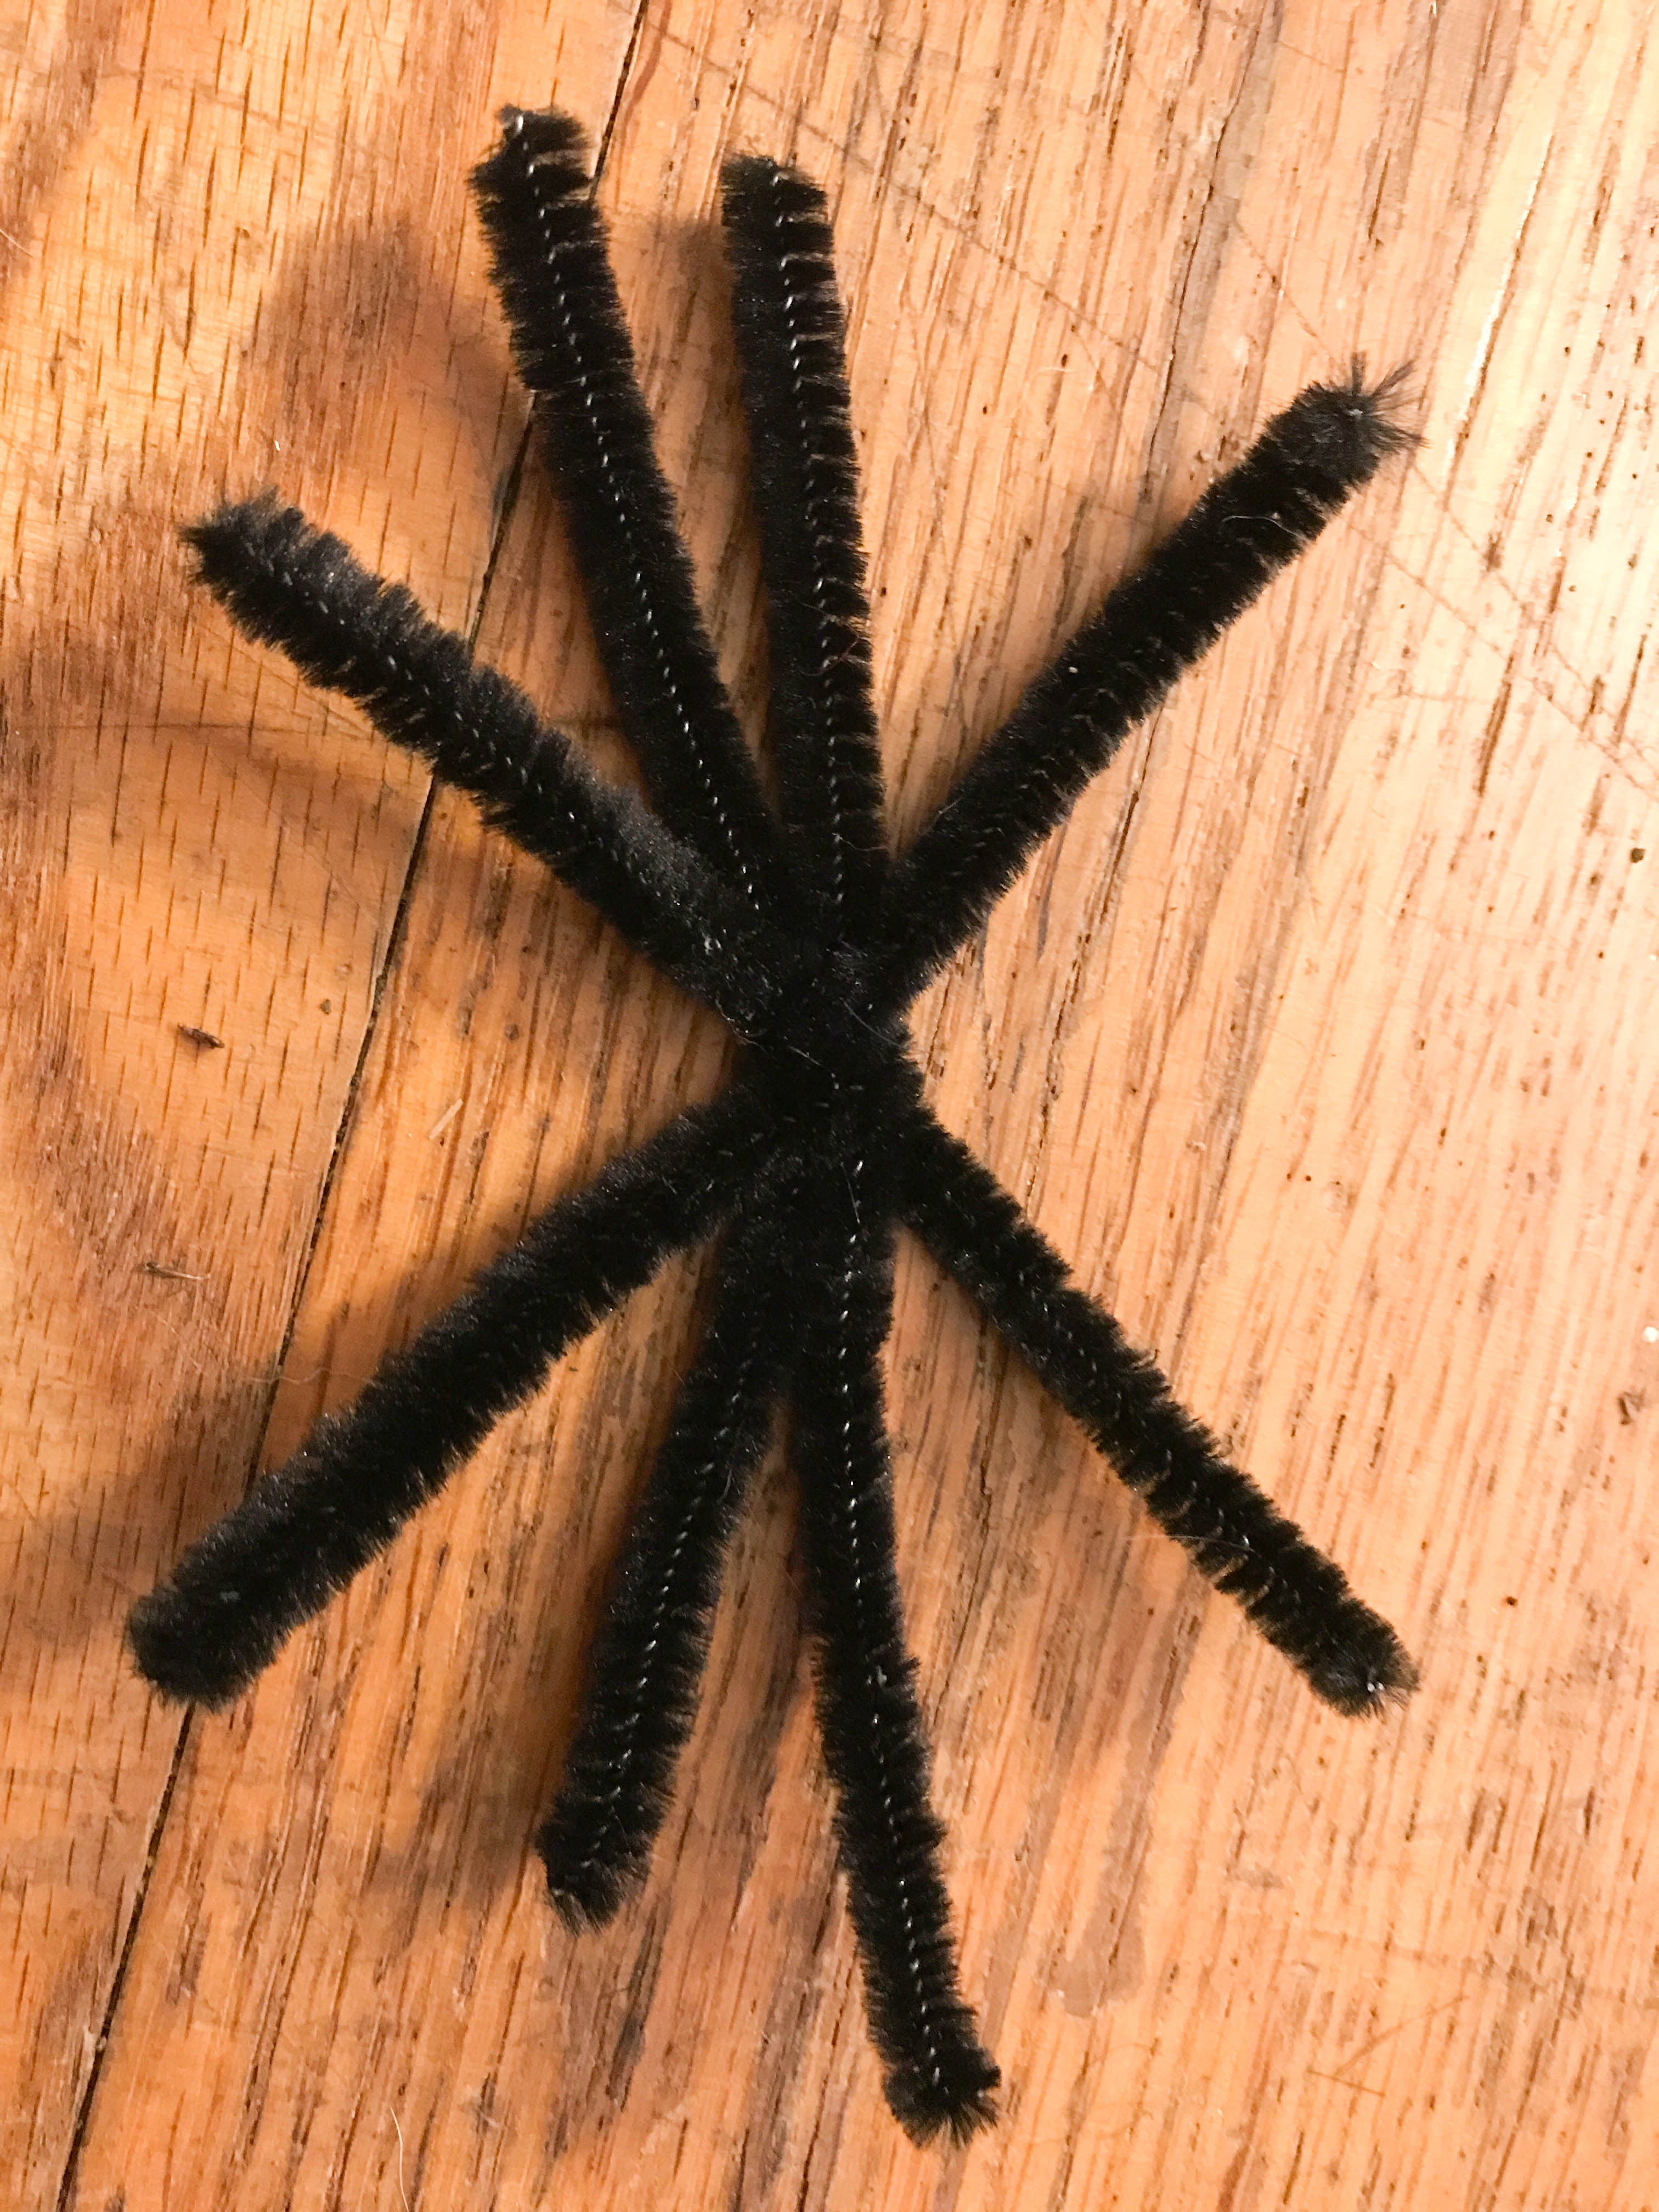 black pipe cleaners pieced together